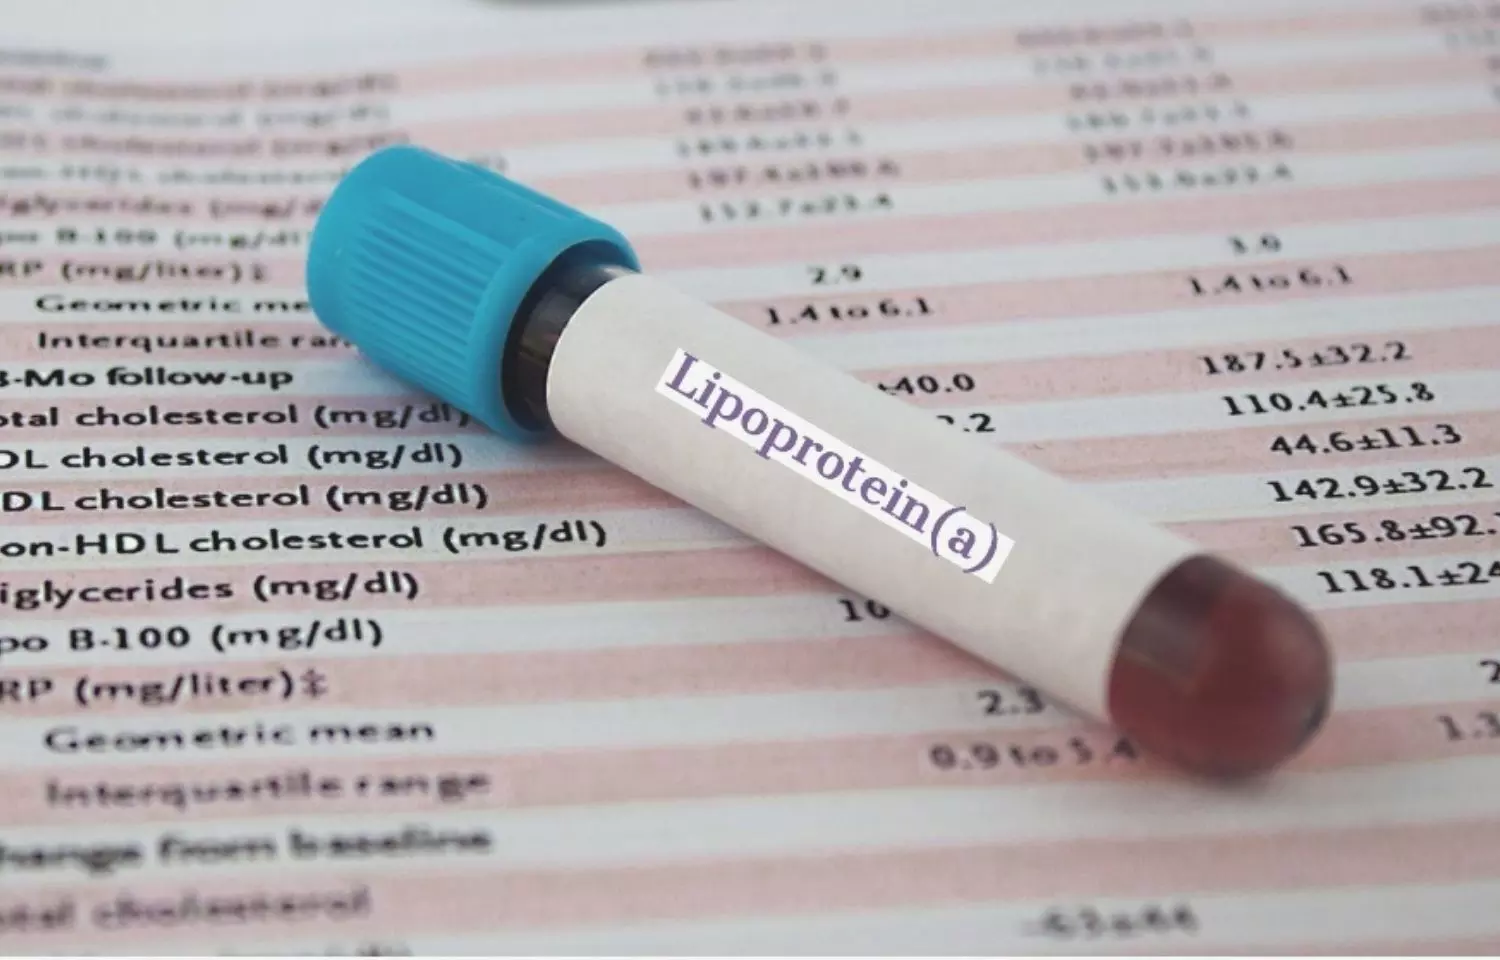 Lipoprotein (a) holds prognostic value in women taking menopausal hormone therapy: JAMA